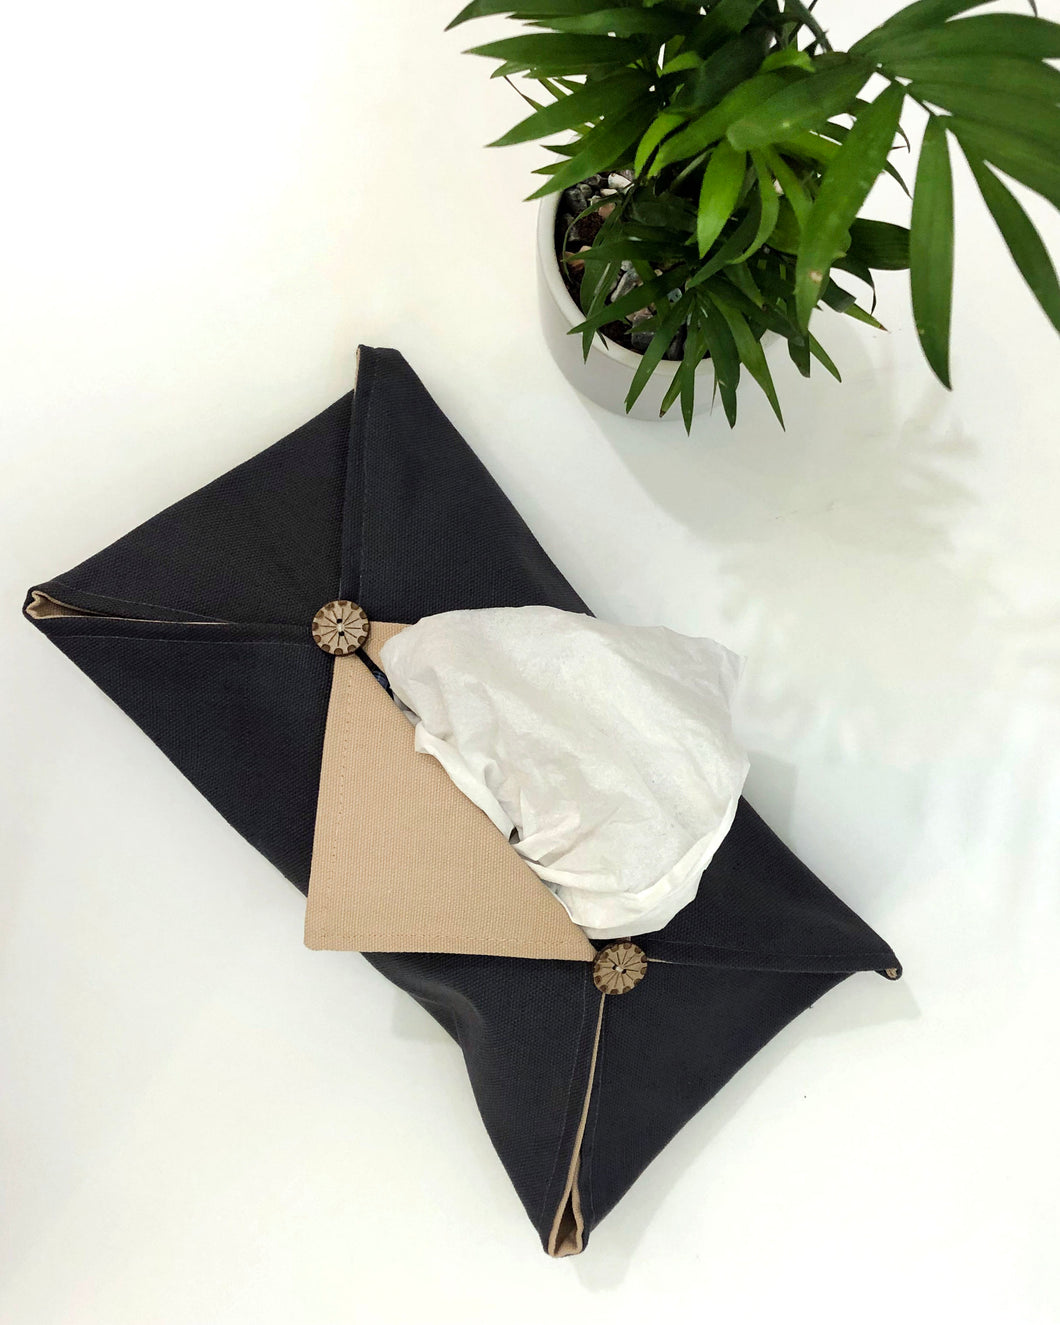 Black and Beige Fabric Tissue Cover